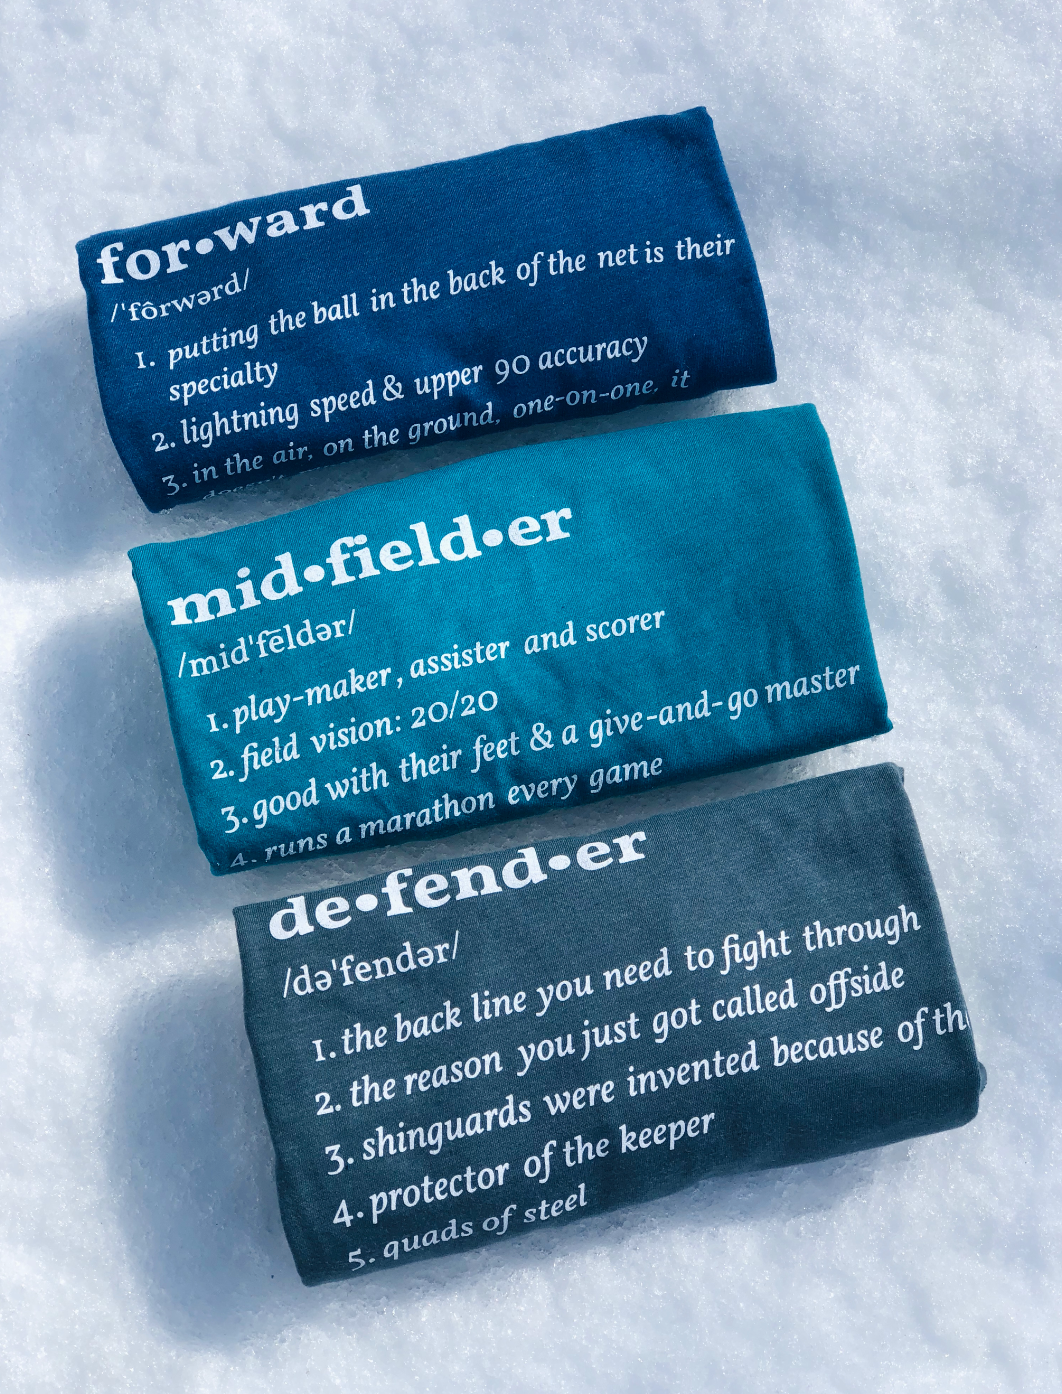 forward midfield and defender blue shirts for soccer girls in snow 